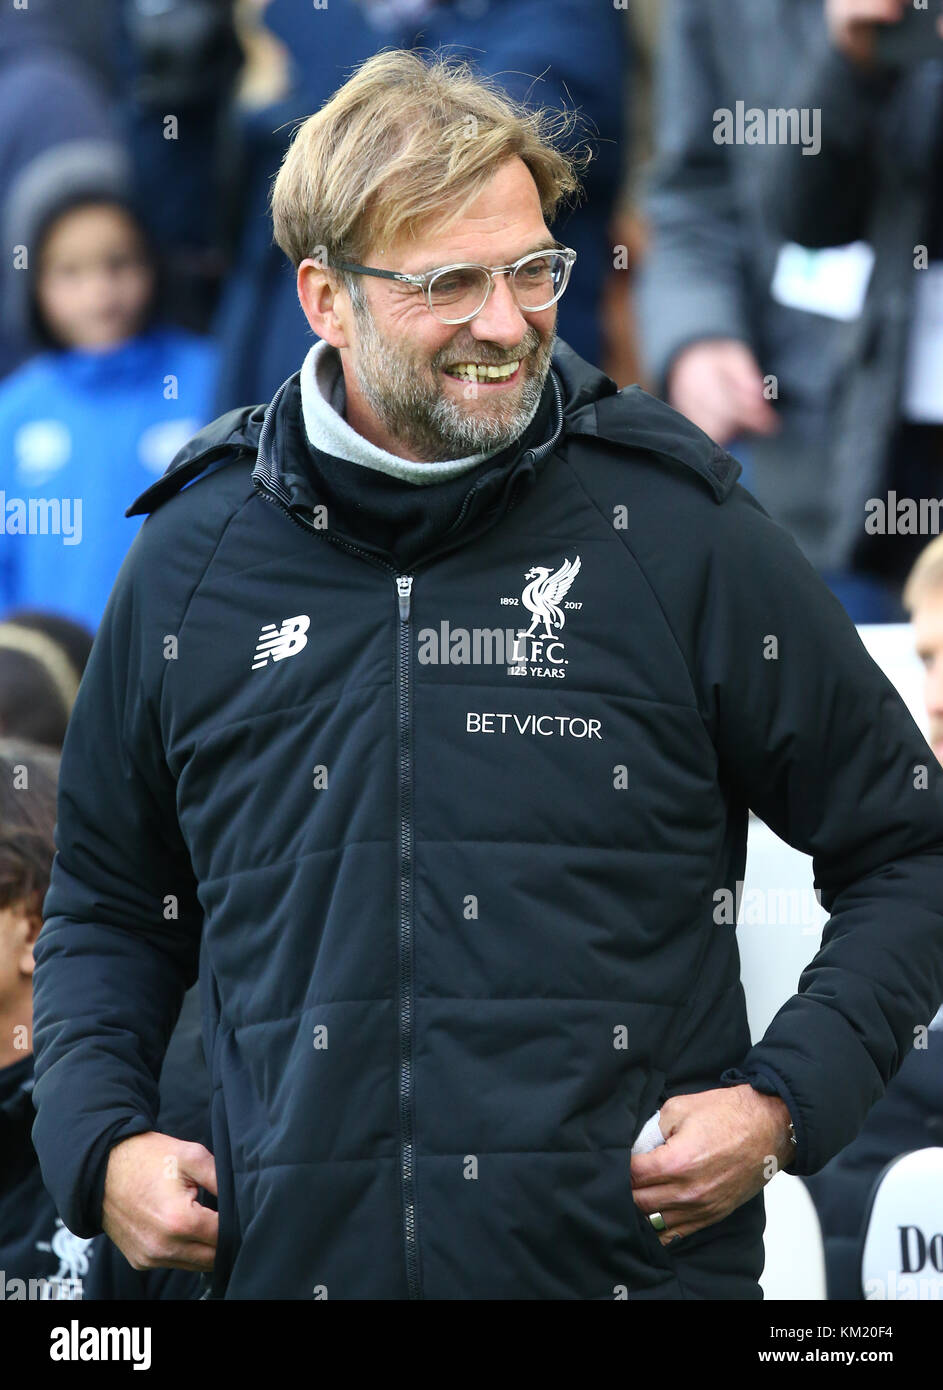 Liverpool manager Jurgen Klopp during the Premier League match between Brighton and Hove Albion and Liverpool at the American Express Community Stadium in Brighton and Hove. 02 Dec 2017 *** EDITORIAL USE ONLY *** FA Premier League and Football League images are subject to DataCo Licence see www.football-dataco.com Stock Photo